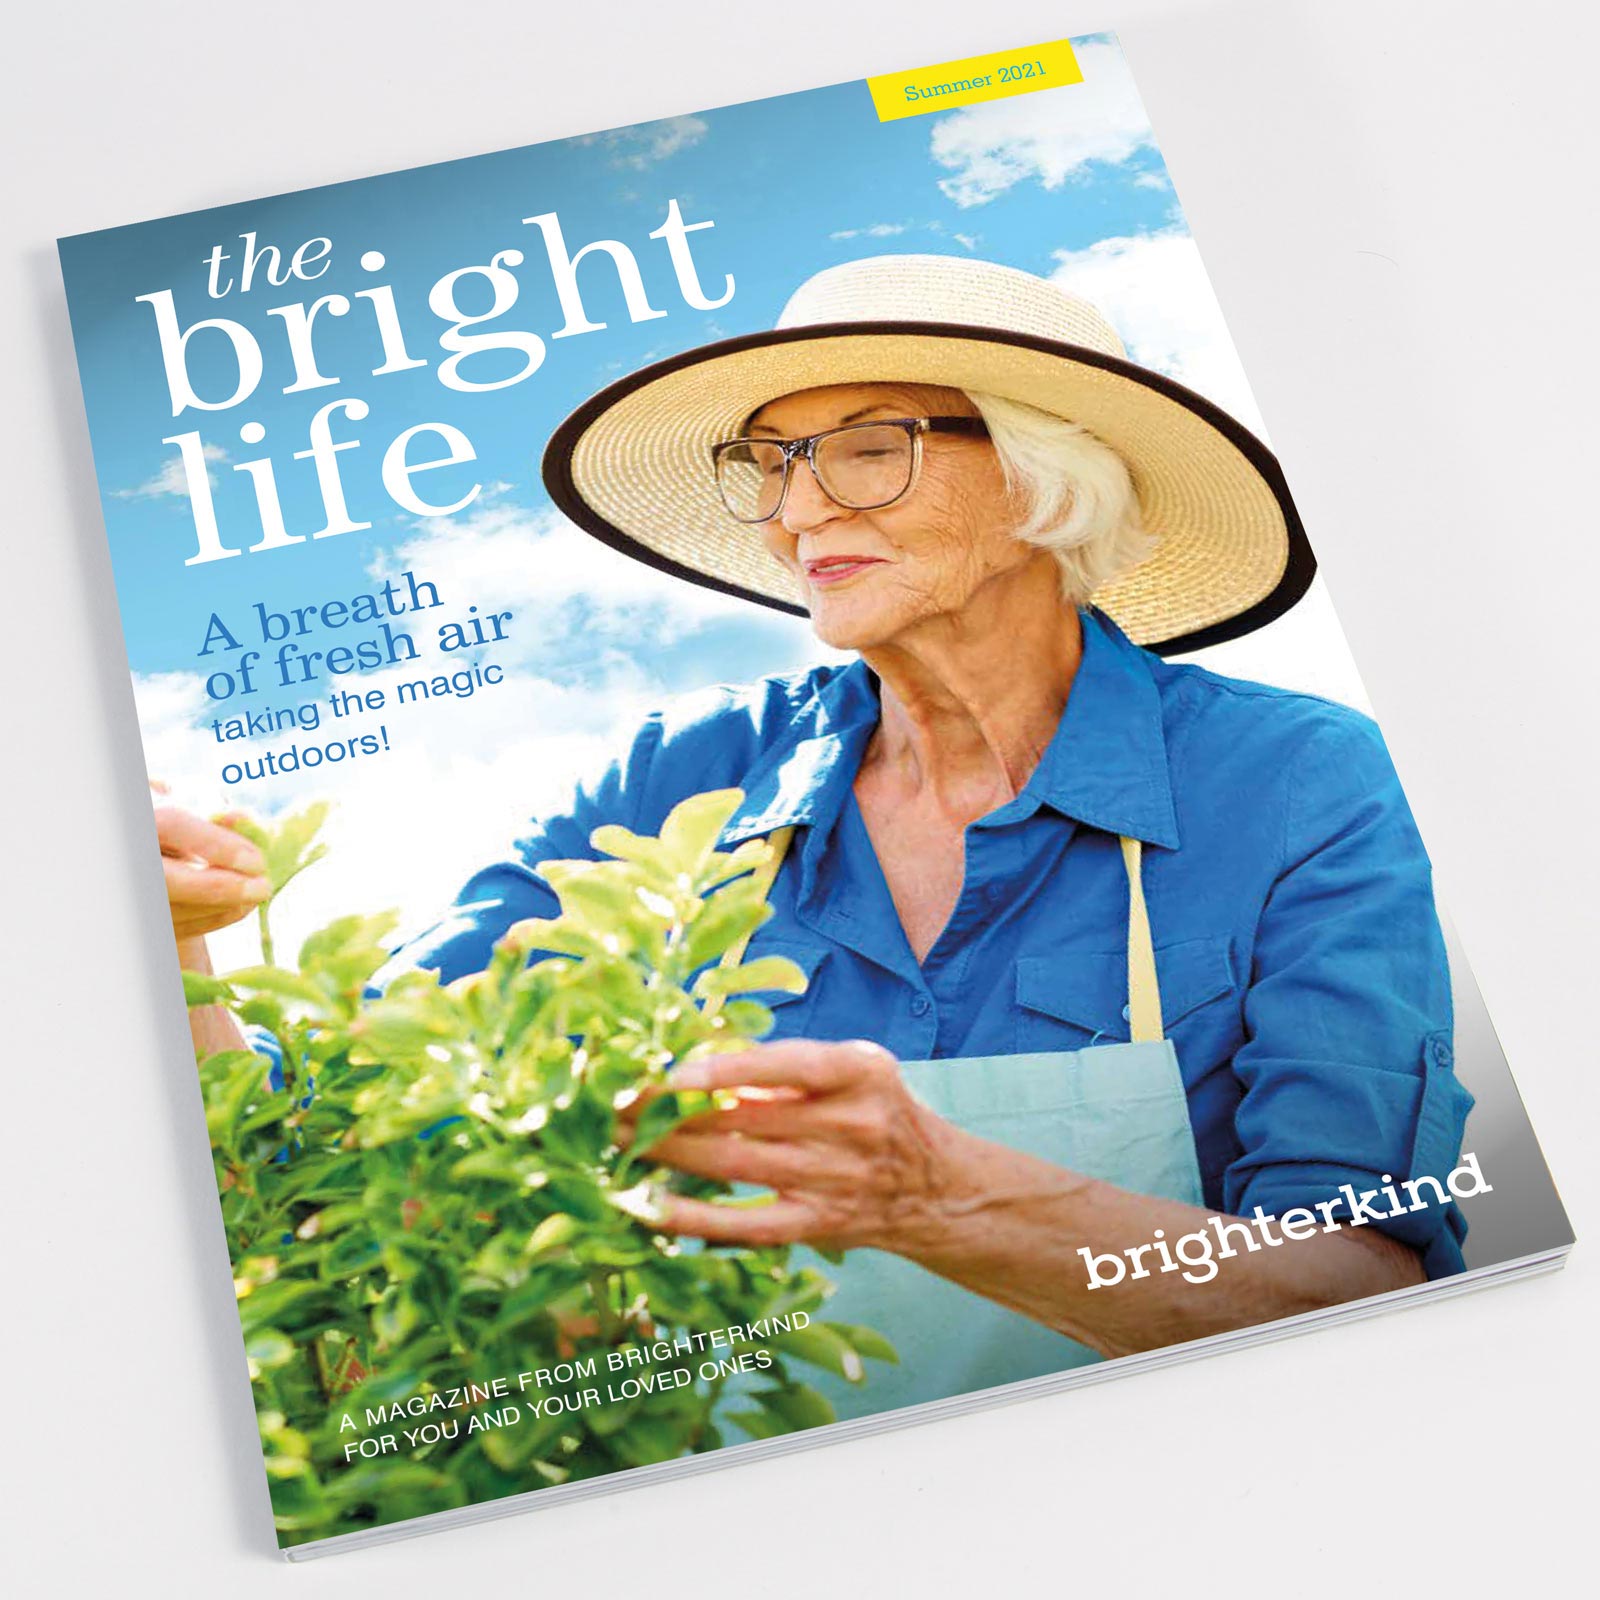 brighterkind senior care marketing campaigns and publishing